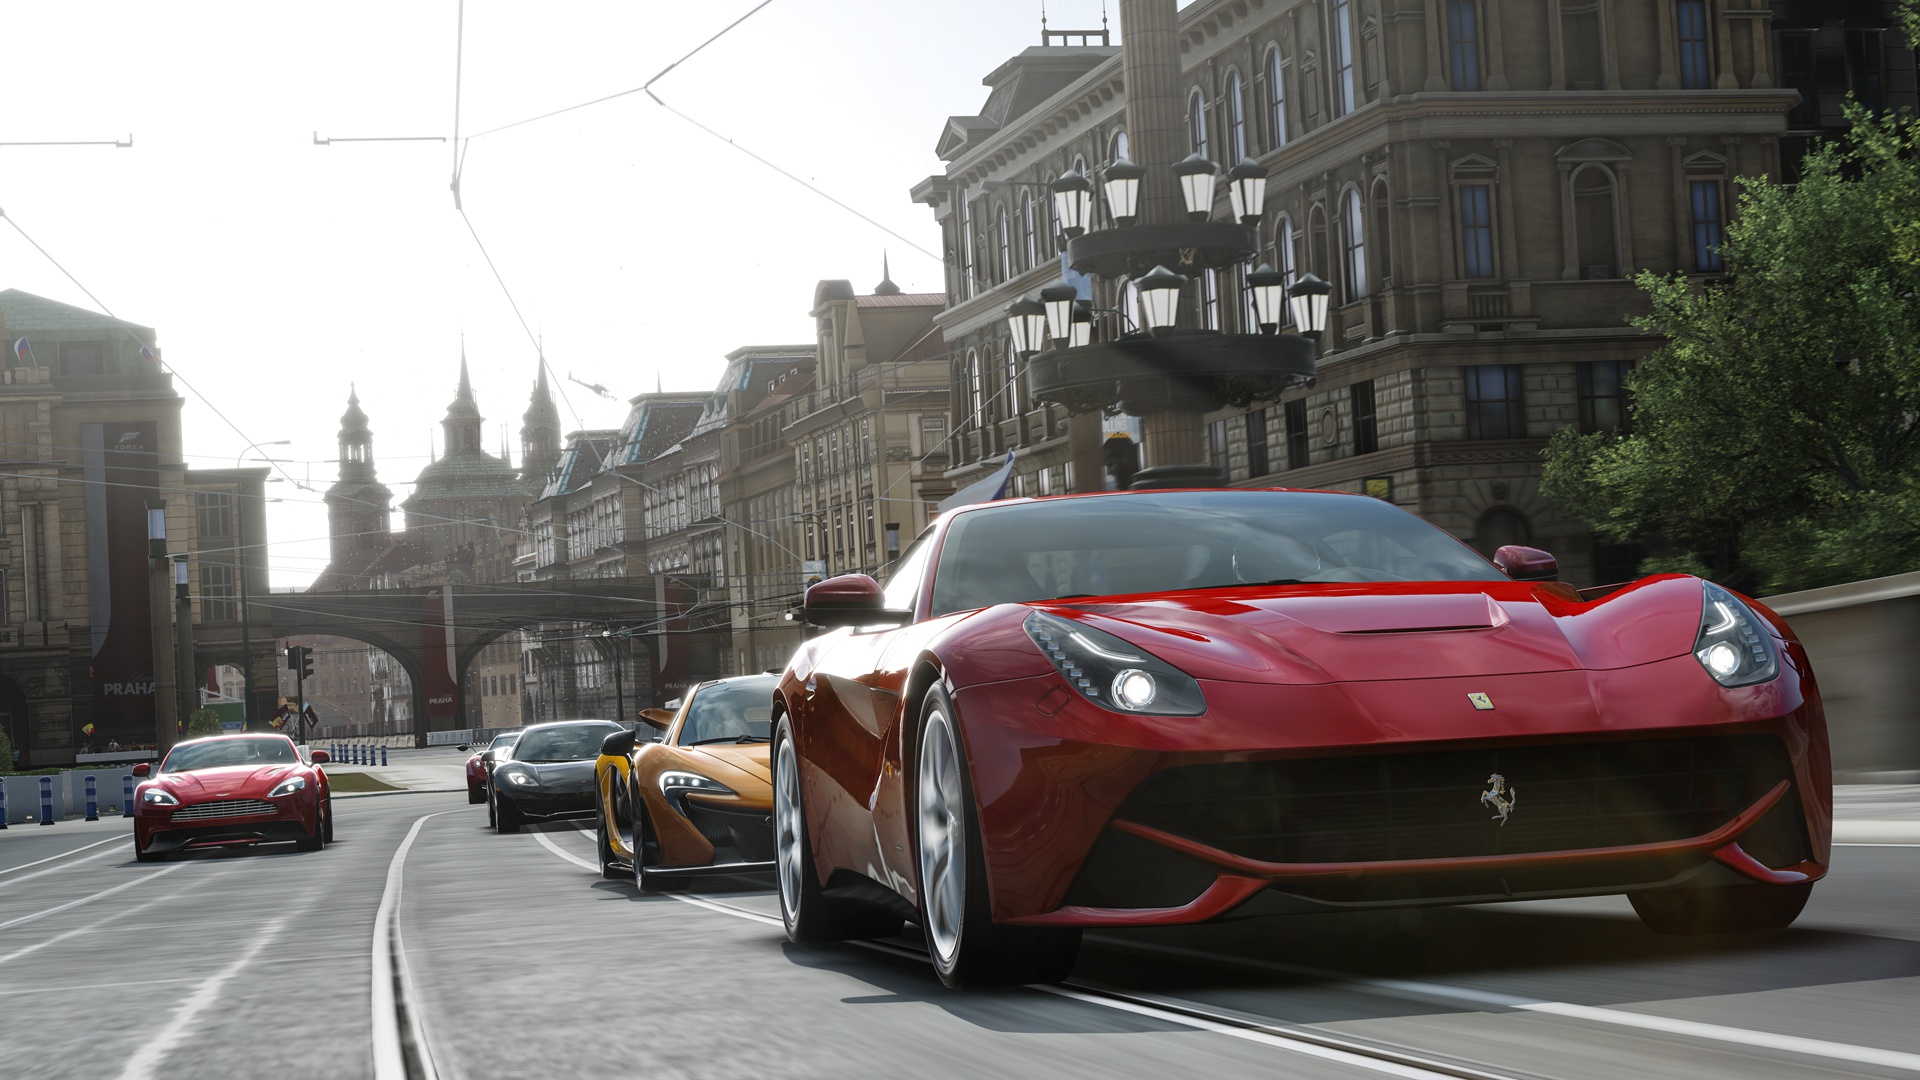 ><br/>While you start out with a veritable menagerie of vehicles in Forza Horizon 2, you're inevitably going to find yourself wanting more. And that's totally understandable. There are over 200 cars to choose from in-game, so a thirst for newer and faster rides will eventually rear its hugly head. How can you beef up your car collection effectively? Prima Gameshas the scoop on how you can do this in a hurry!<br/><br/> You Better Shop Around<br/><br/>Obviously, the main option when it comes to purchasing vehicles is to visit the store. You can access this at any time from the game's sub-menu to peruse the available selection.<br/><br/>However, there are two things to keep in mind. First, the more powerful performers in the game, such as select Ferrari models, cost a pretty penny when it comes to credits. We're talking at least 150,000, which can add up quickly if you're just getting started. The best way to achieve this goal is to continue taking on challenges, including ones from rivals and Drivatars, as well as side events. The more you tackle, the closer you get to earning that ride.<br/><br/><br/><br/>The second thing to keep in mind is that, when you're entering new tournament tiers, you'll need to buy a basic model if you want to get started. For example, when you tackle the Rally tournament for the first time (out of a selection of three), you'll need a compatible rally car to take part. You can select from different models, but it never hurts to have a couple on hand, especially if you want one with peak performance. Take a look and don't make a blind choice. After all, this will be a difference maker when competing at a top level.<br/><br/>Be sure to visit the shop as often as you can, as the vehicle selection can change and offer some exciting new rides. Don't forget to check any DLC available with purchasing the game, including the Forza Horizon 2 Day One pack. <br/><br/>Click hereto continue reading!</P> <P>Tags: day one pack, forza, forza horizon 2, how to get new cars in forza horizon 2, racing, xbox one</P>
<div style='clear: both;'></div>
<div class='share-box'>
<div class='share-art'>
<a class='fac-art' href='http://www.facebook.com/sharer.php?u=http://gametvbox.blogspot.com/2014/08/snag-sweet-new-ride-in-forza-horizon-2.html' rel='nofollow' target='_blank' title='Facebook Share'><i aria-hidden='true' class='fa fa-facebook'></i> Share</a>
<a class='twi-art' href='http://twitter.com/share?url=http://gametvbox.blogspot.com/2014/08/snag-sweet-new-ride-in-forza-horizon-2.html' rel='nofollow' target='_blank' title='Twitter Tweet'><i class='fa fa-twitter'></i> Share</a>
<a class='goo-art' href='http://plus.google.com/share?url=http://gametvbox.blogspot.com/2014/08/snag-sweet-new-ride-in-forza-horizon-2.html' rel='nofollow' target='_blank' title='Google Plus Share'><i class='fa fa-google-plus'></i> Share</a>
</div></div>
<div class='entry-tags'>
<a href='http://gametvbox.blogspot.com/search/label/game%20full?&max-results=7' rel='tag'>
game full</a>
<a href='http://gametvbox.blogspot.com/search/label/tax-input-post_tag?&max-results=7' rel='tag'>
tax-input-post_tag</a>
</div>
<div style='clear: both;'></div>
<div class='blog-pager' id='blog-pager'>
<span id='blog-pager-newer-link'>
<a class='blog-pager-newer-link' href='http://gametvbox.blogspot.com/2014/08/top-10-minecraft-mods.html' id='Blog1_blog-pager-newer-link' title='Bài đăng Mới hơn'>
Bài đăng Mới hơn
</a>
</span>
<span id='blog-pager-older-link'>
<a class='blog-pager-older-link' href='http://gametvbox.blogspot.com/2014/08/how-to-tackle-crown-of-ivory-king-in.html' id='Blog1_blog-pager-older-link' title='Bài đăng Cũ hơn'>
Bài đăng Cũ hơn
</a>
</span>
</div>
<div class='clear'></div>
<div id='related-posts'>
<h4 style='border-bottom:2px solid #fe7f34;'>
            BÀI VIẾT LIÊN QUAN:
        </h4>
<script src='/feeds/posts/default/-/game full?alt=json-in-script&callback=related_results_labels' type='text/javascript'></script>
<script src='/feeds/posts/default/-/tax-input-post_tag?alt=json-in-script&callback=related_results_labels' type='text/javascript'></script>
<script type='text/javascript'>
            var maxresults=7;
            removeRelatedDuplicates();
            printRelatedLabels(